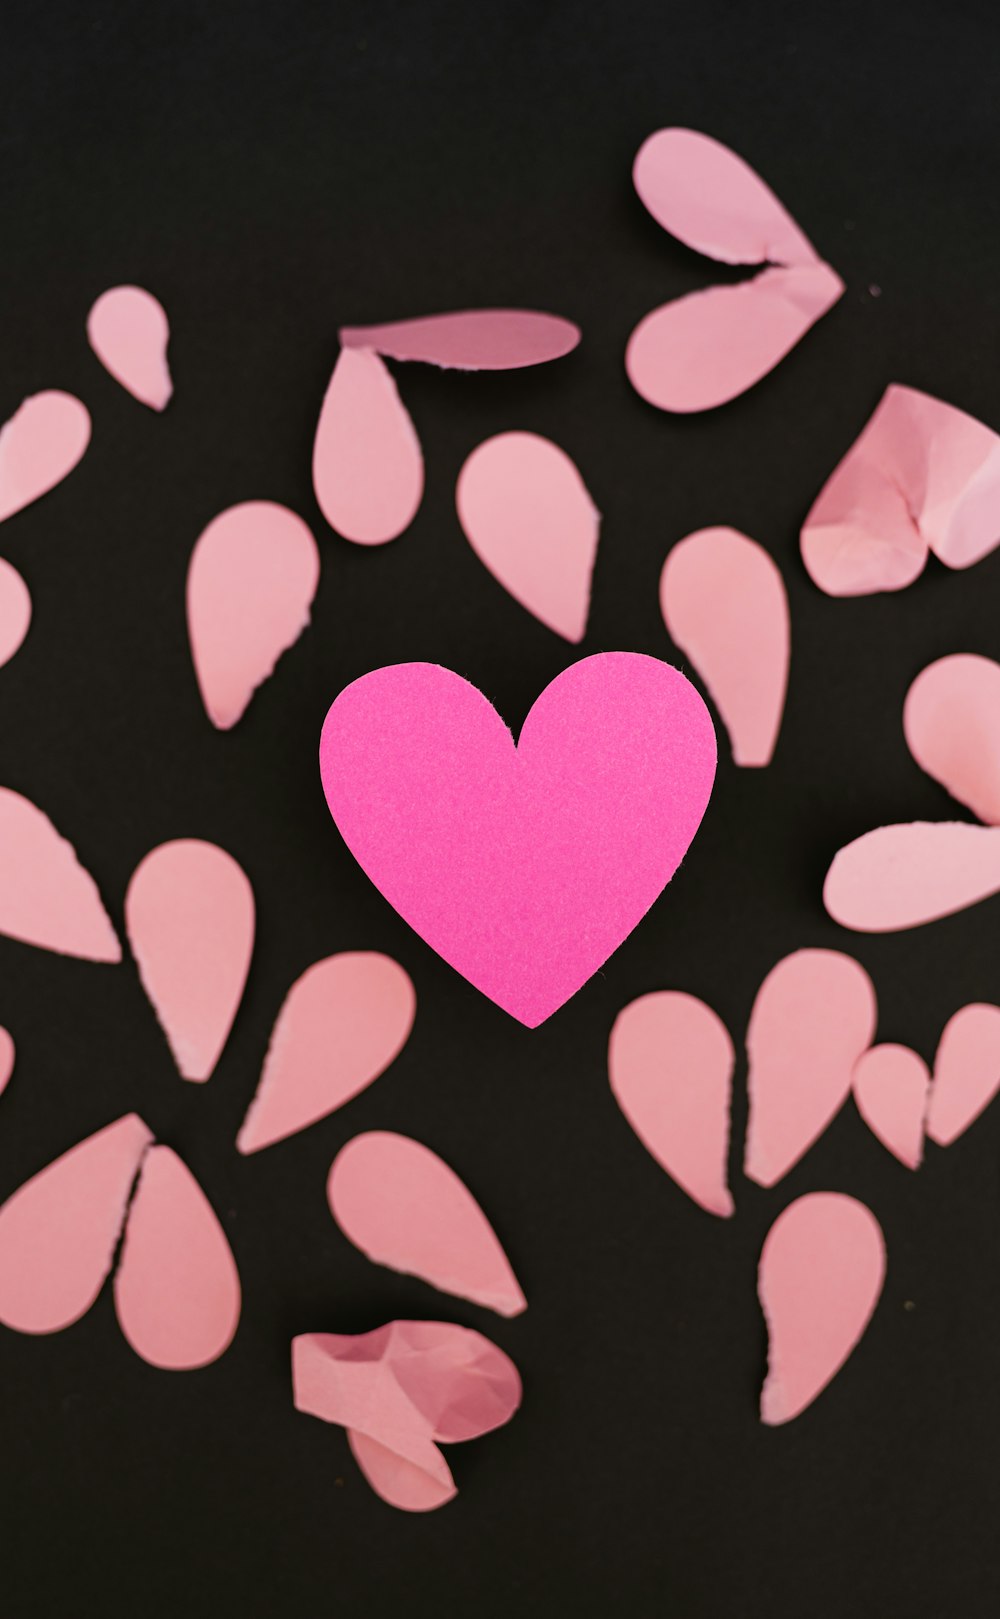 a pink heart surrounded by pink petals on a black background